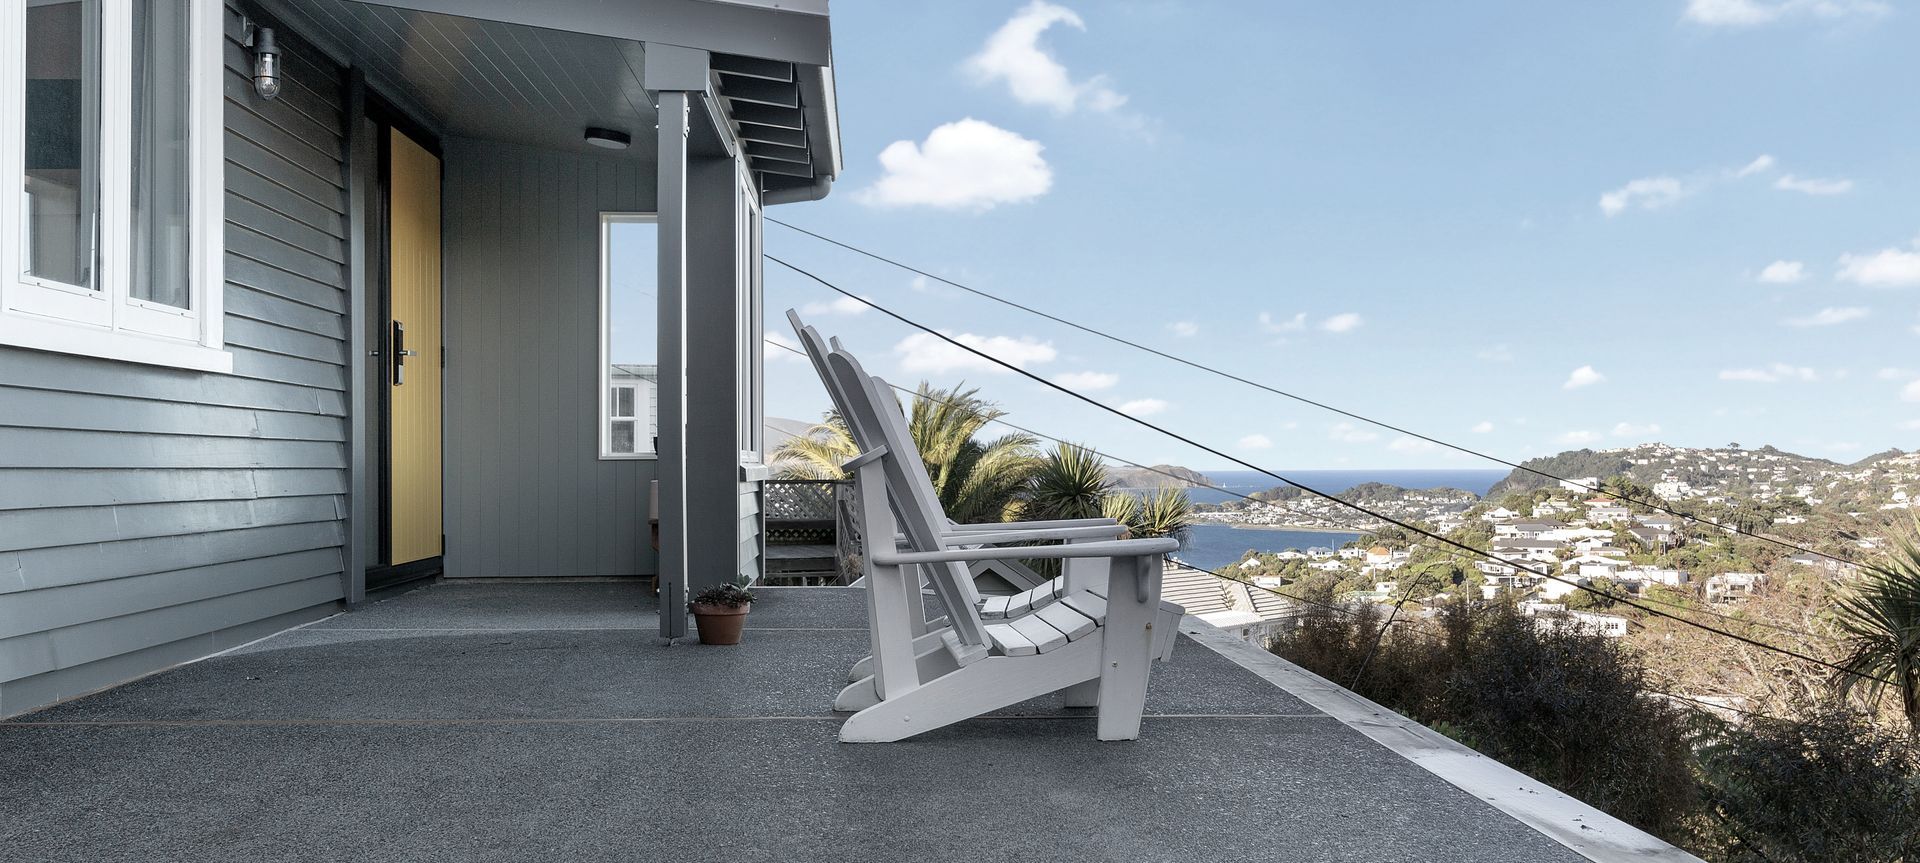 Cook Strait Views: An Outdoor Area and Extension in the Karaka Hills banner